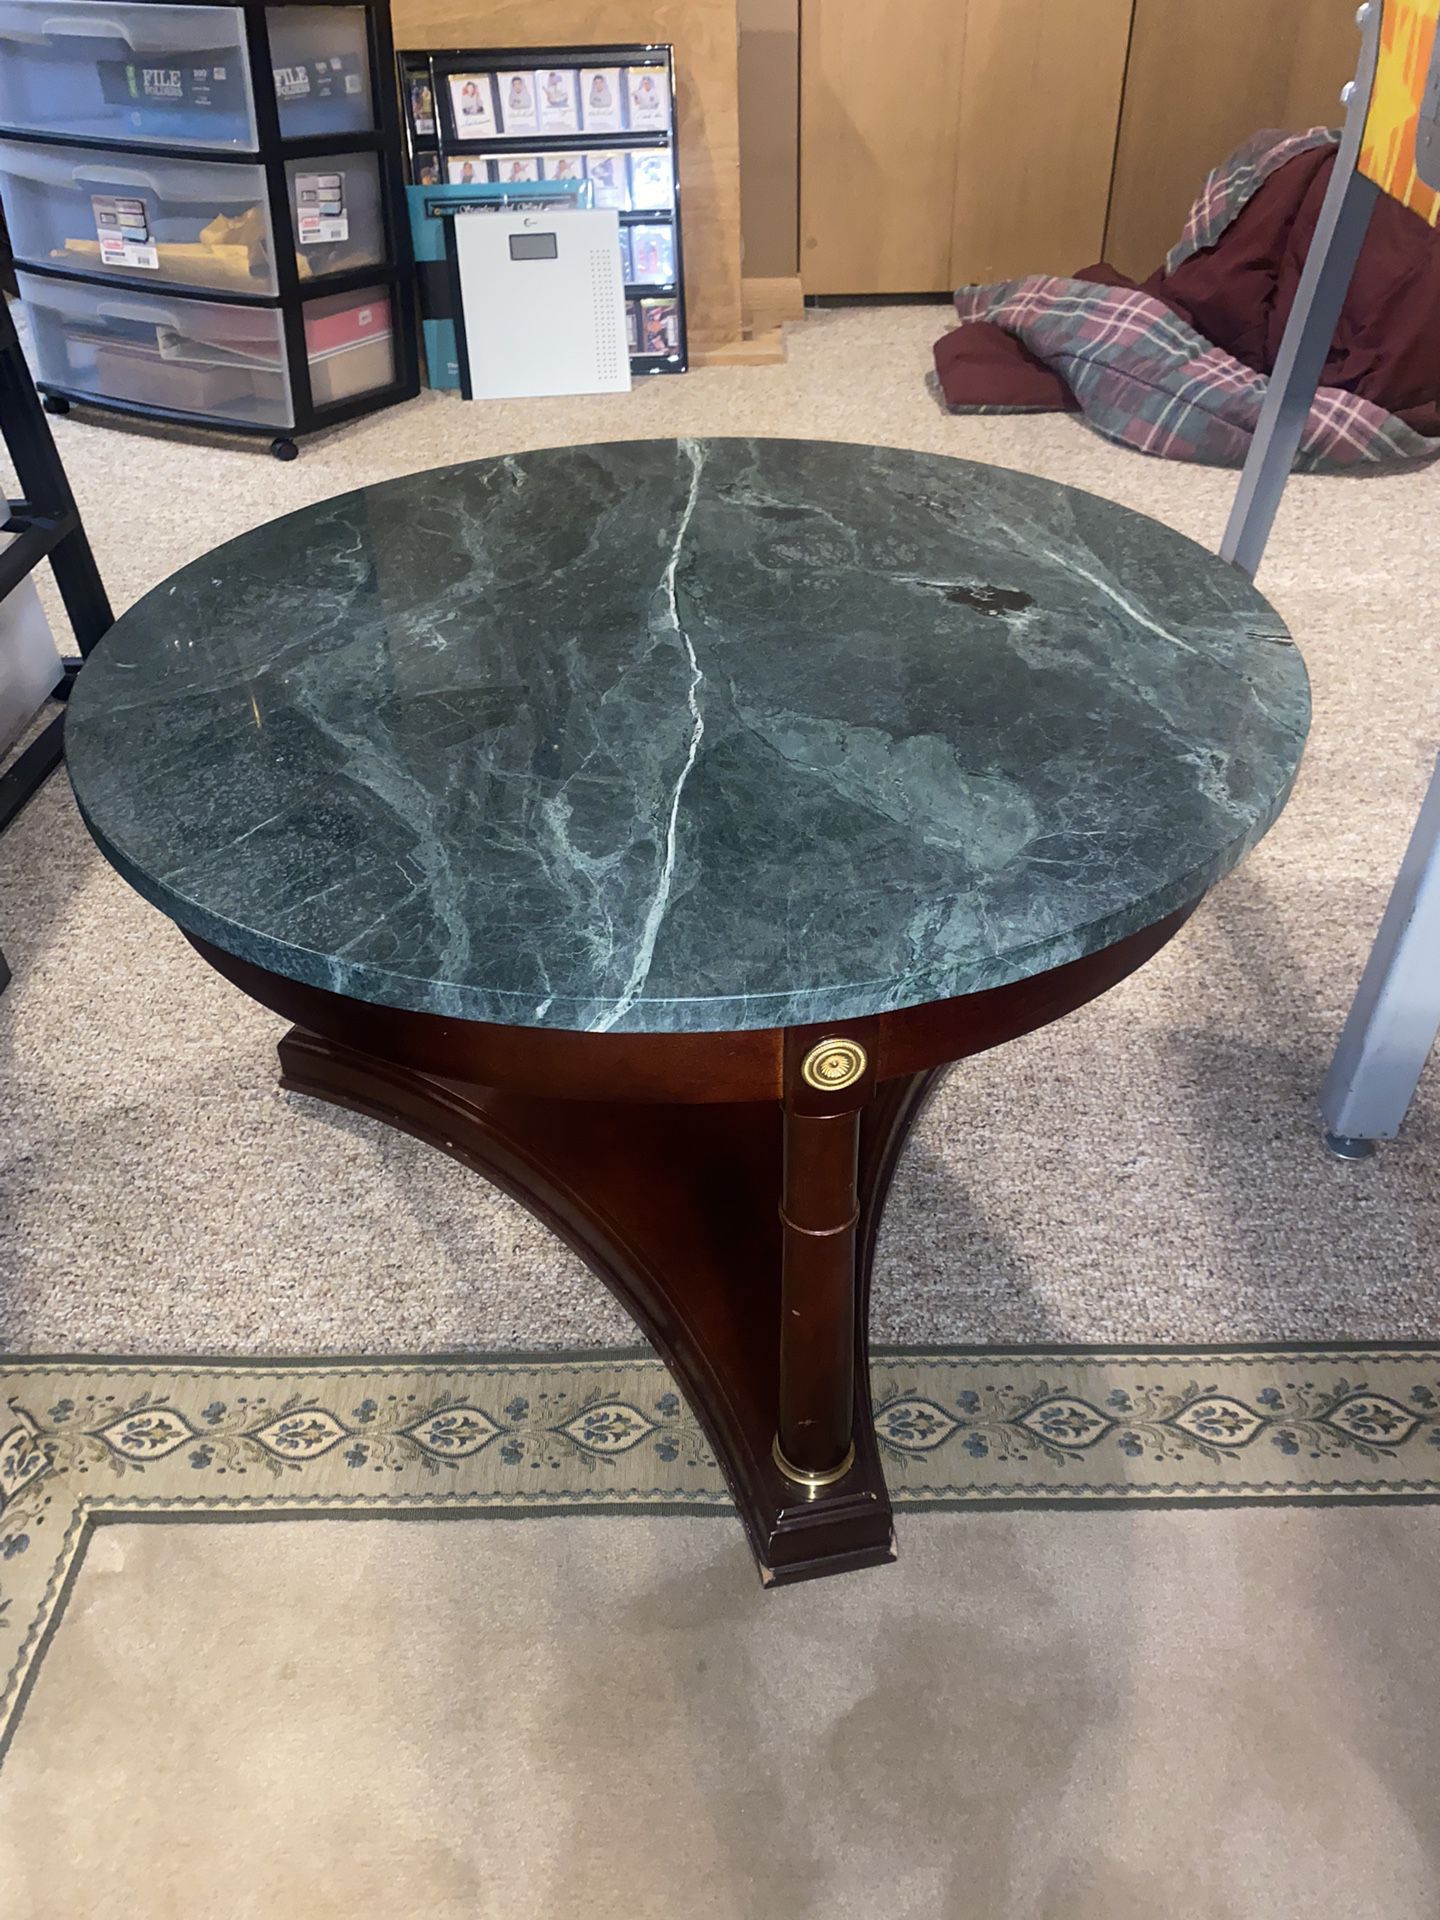 (2) Bombay Company Classic Marble  Coffee Tables.   $200